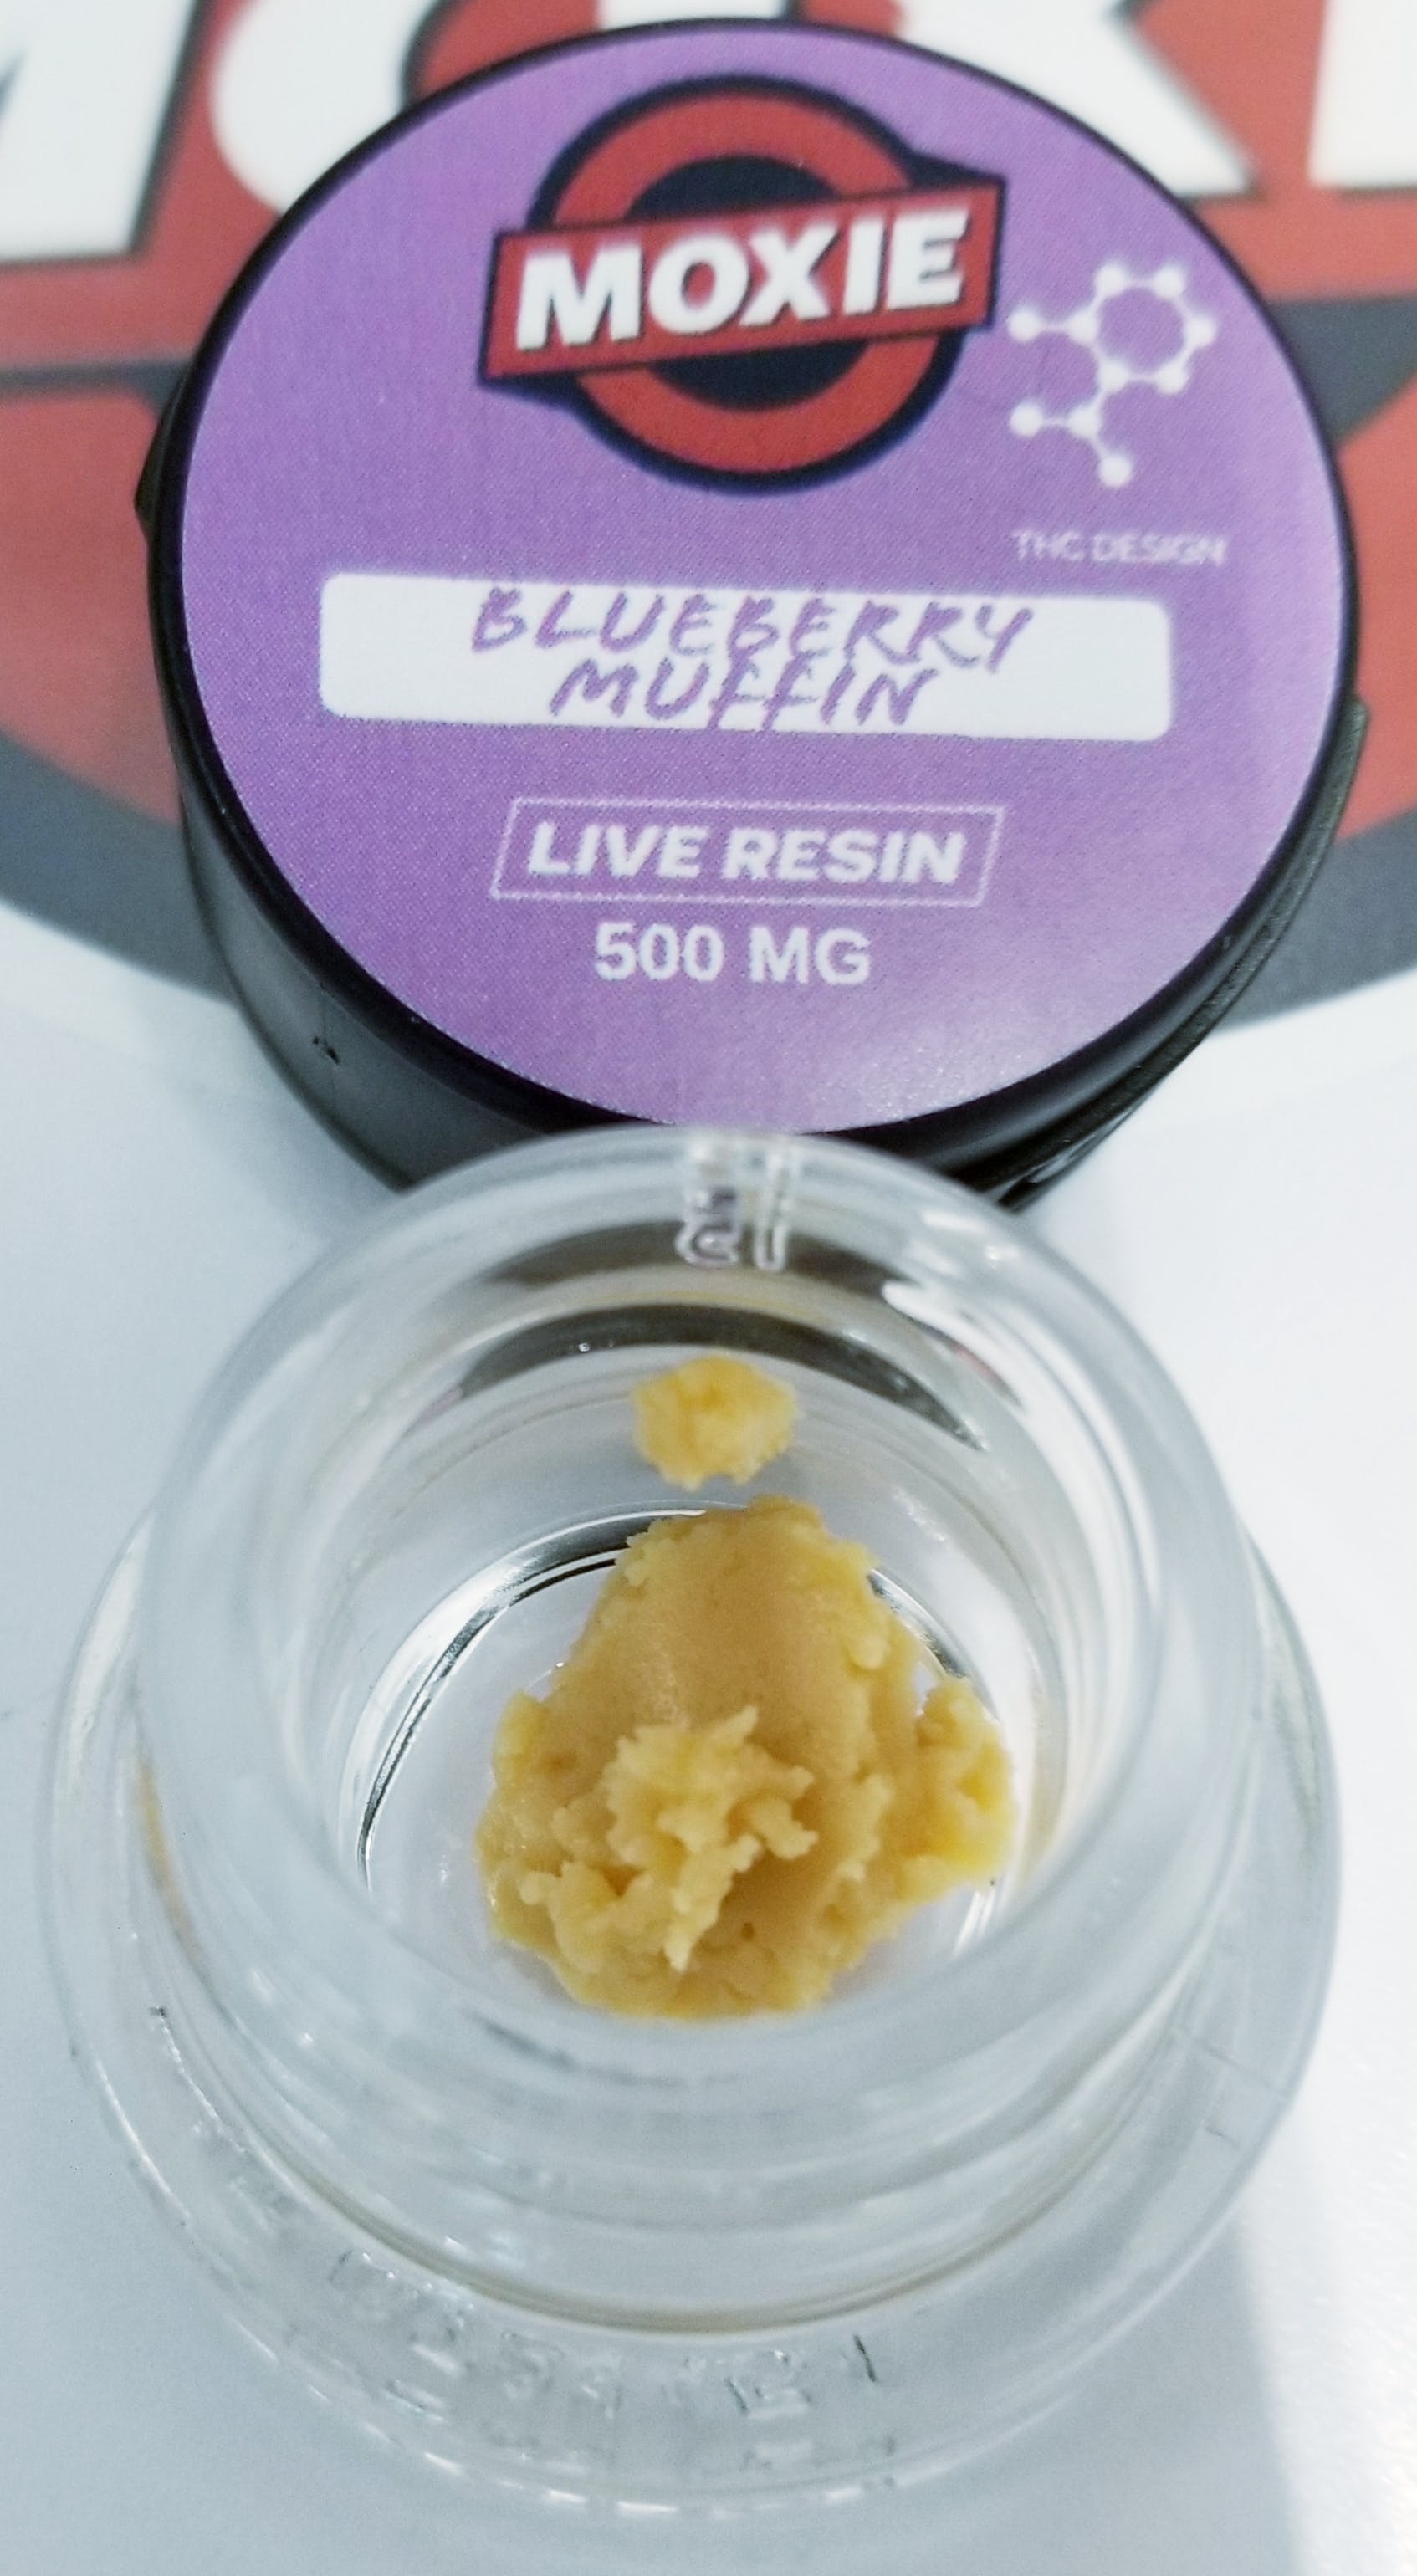 marijuana-dispensaries-the-pottery-recreational-in-los-angeles-blueberry-muffin-live-resin-badder